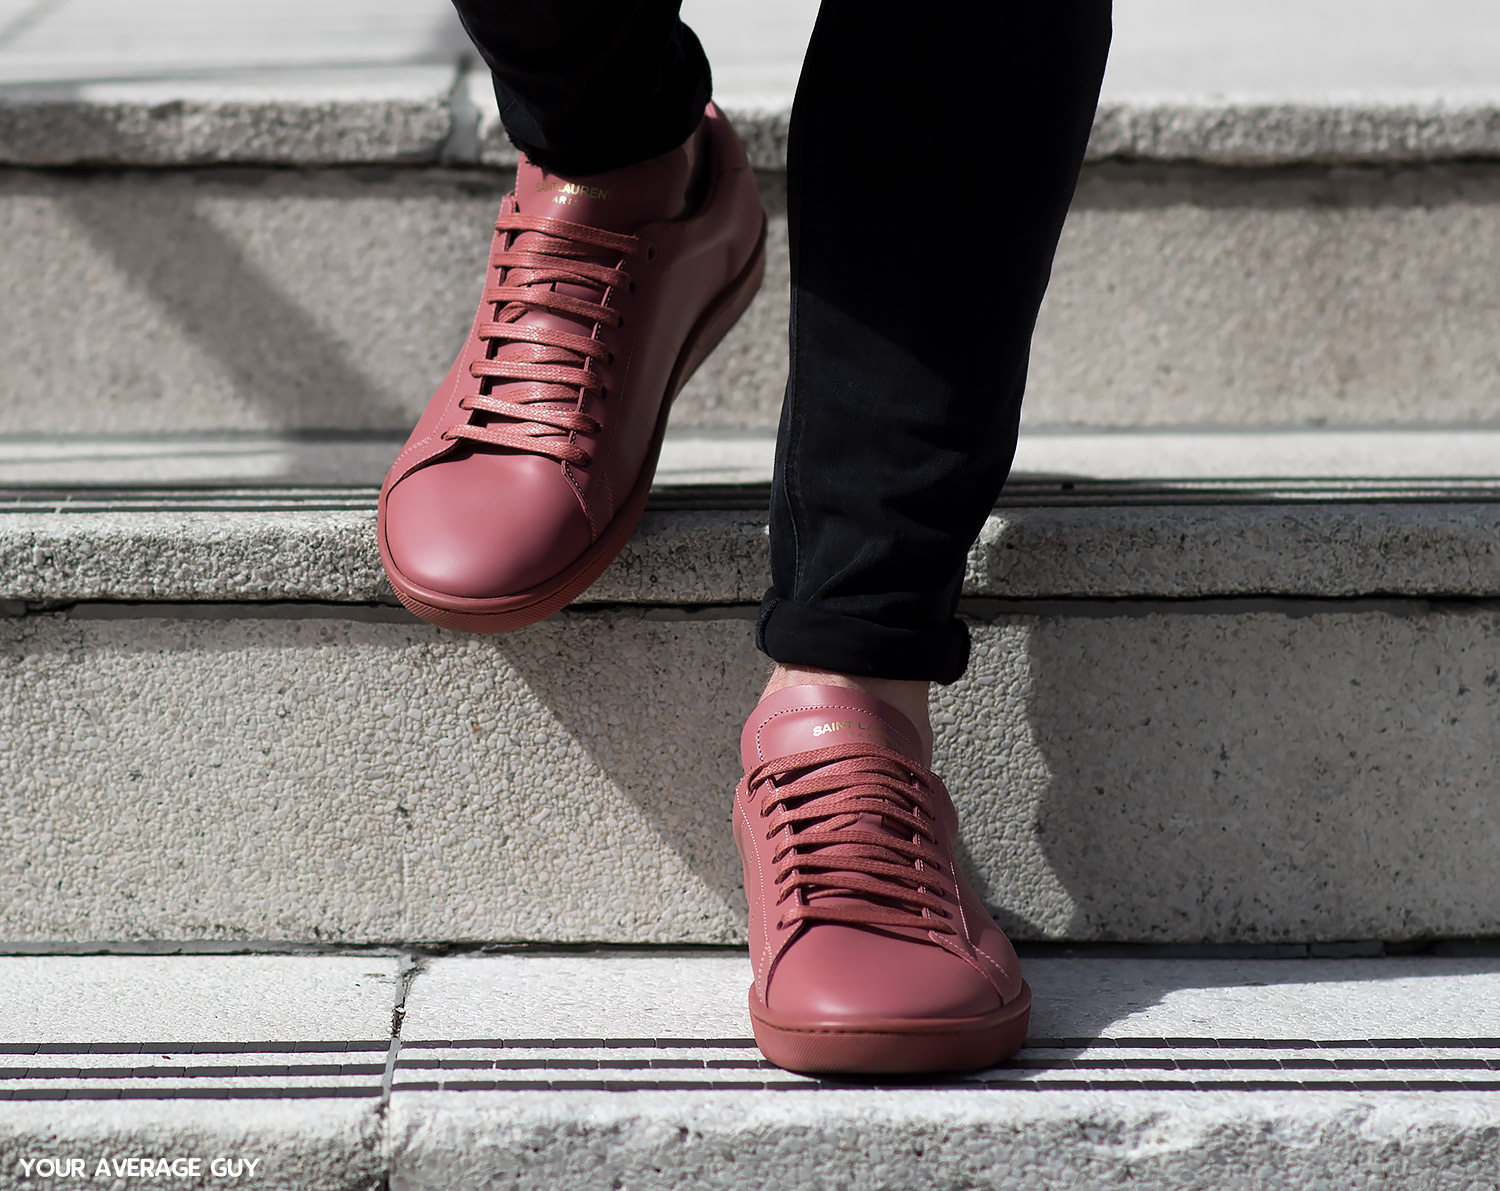 Saint Laurent Dusty Rose Court Classic Sneakers Review | Your Average Guy